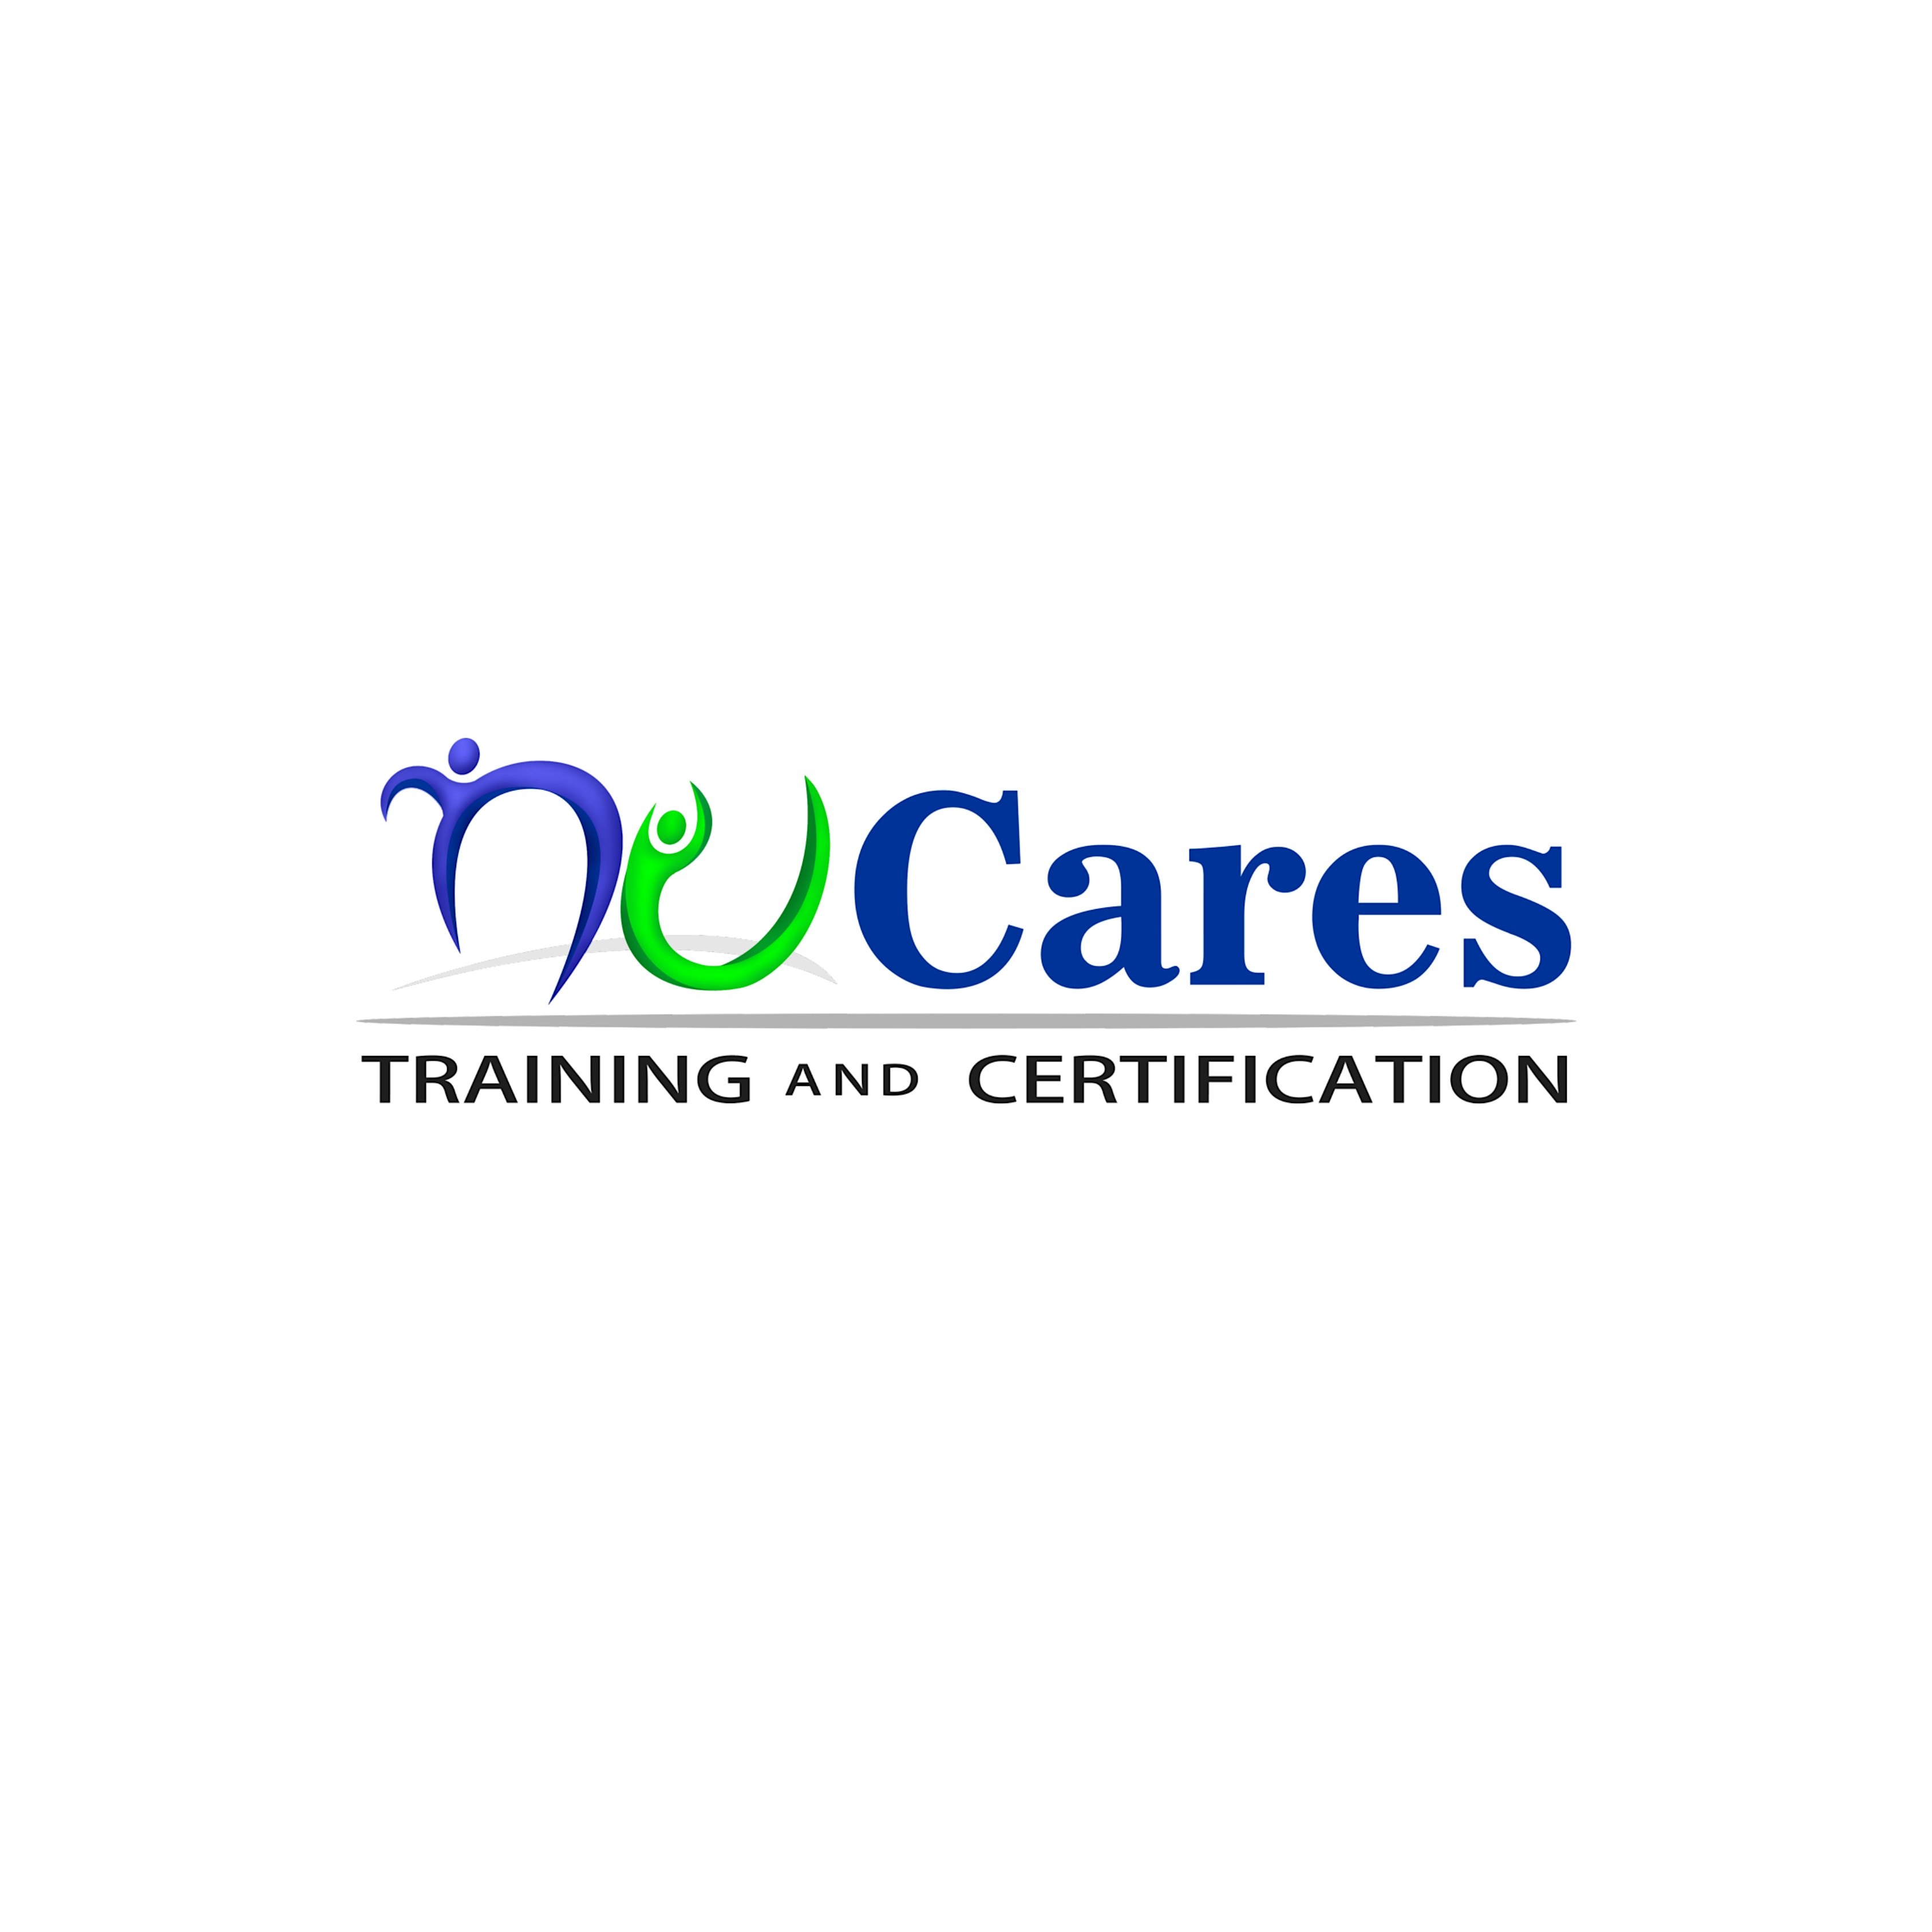 NUCares Professional Training and Certification